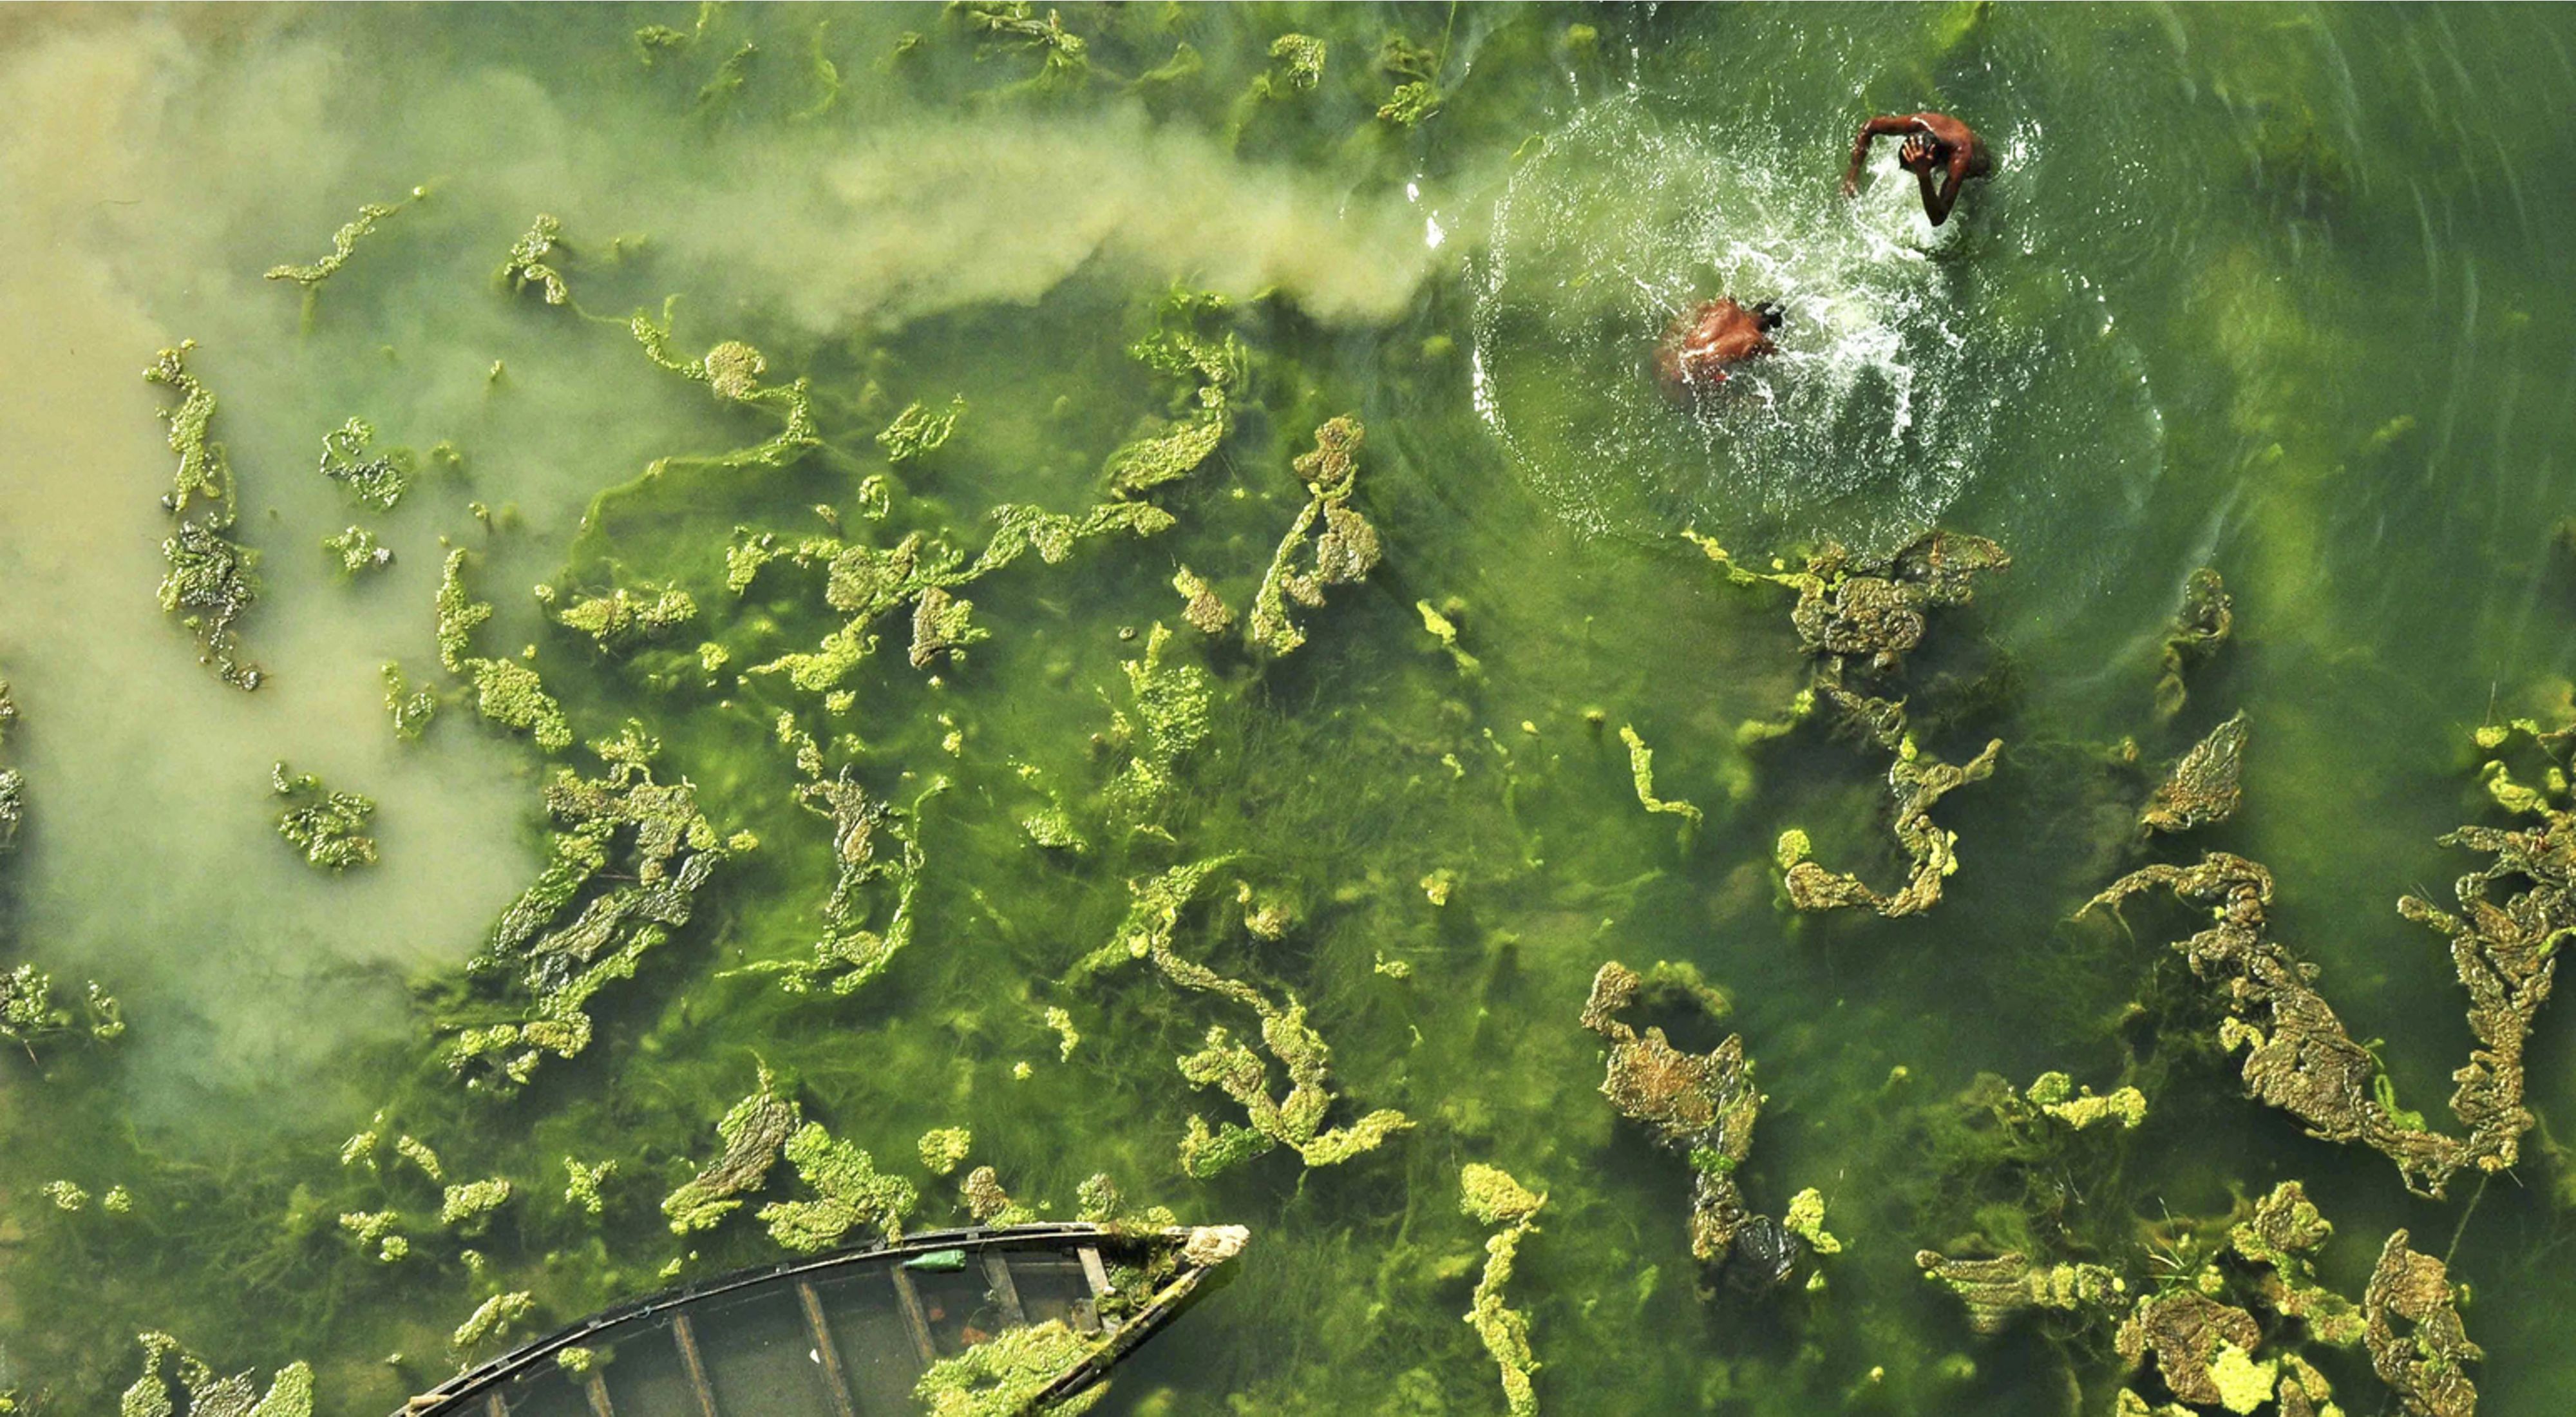 Aerial view of people bathing in West Bengal, India.